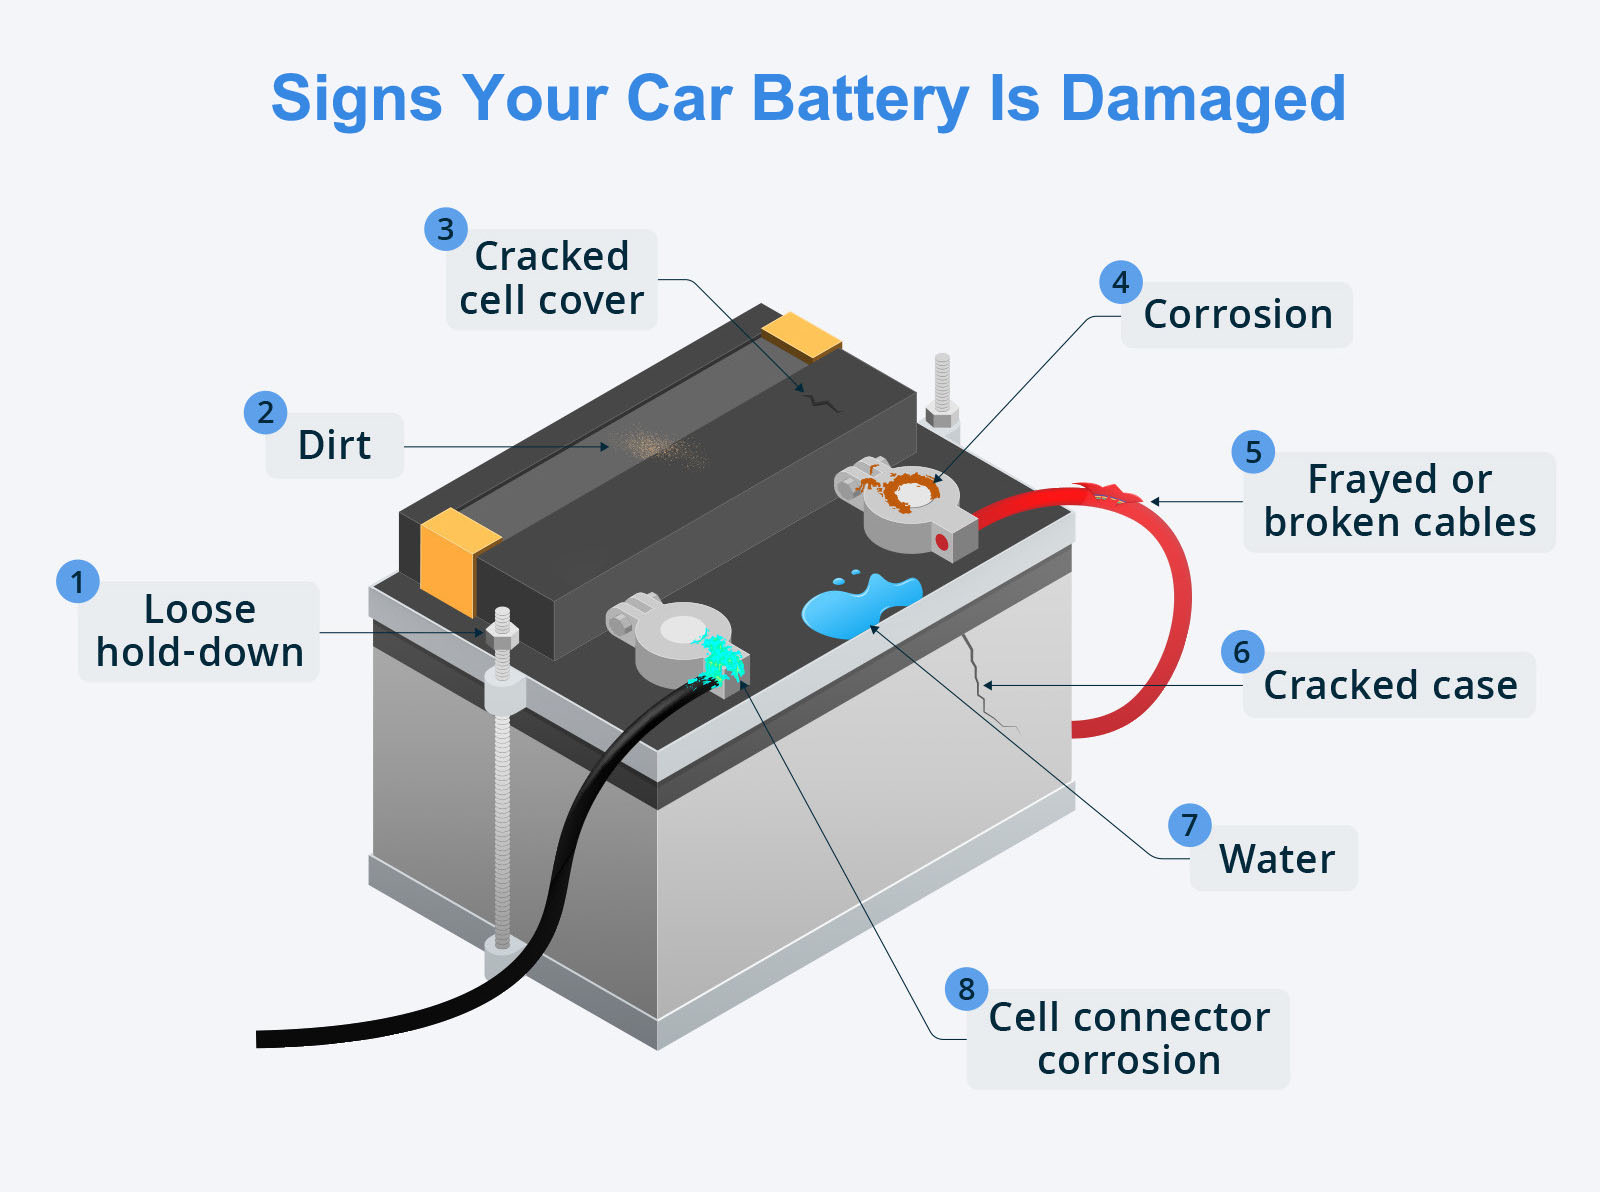 Signs Your Car Battery Is Damaged